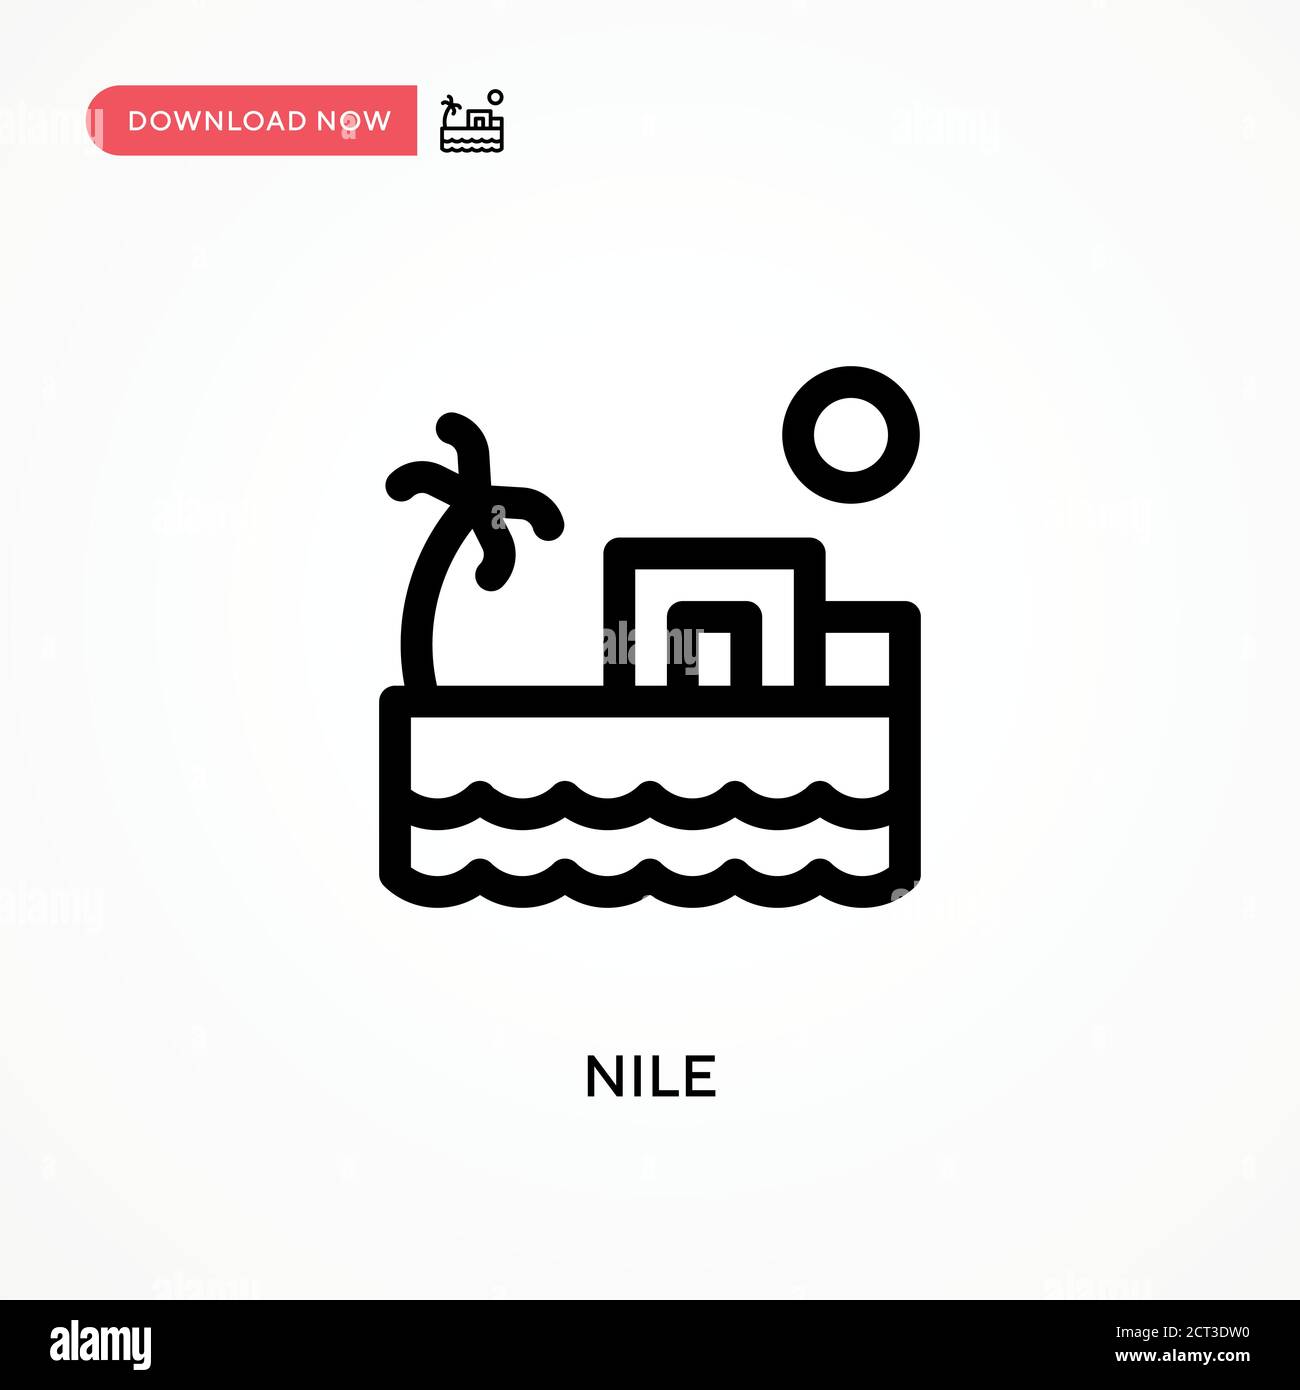 Nile Simple vector icon. Modern, simple flat vector illustration for web site or mobile app Stock Vector